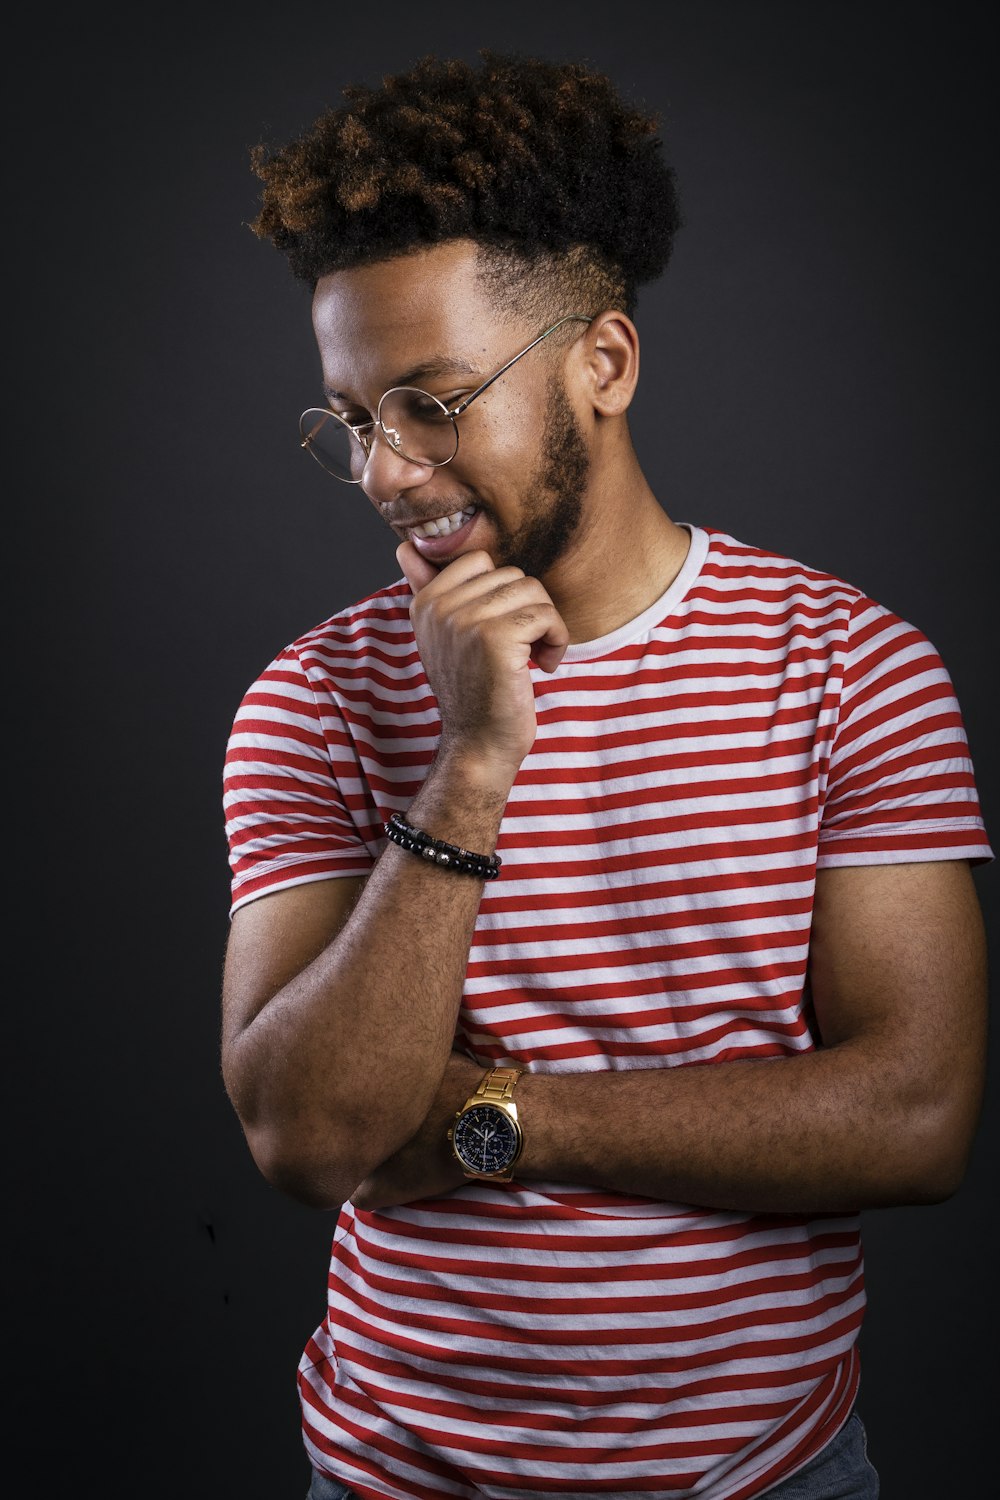 a man with glasses and a red and white striped shirt